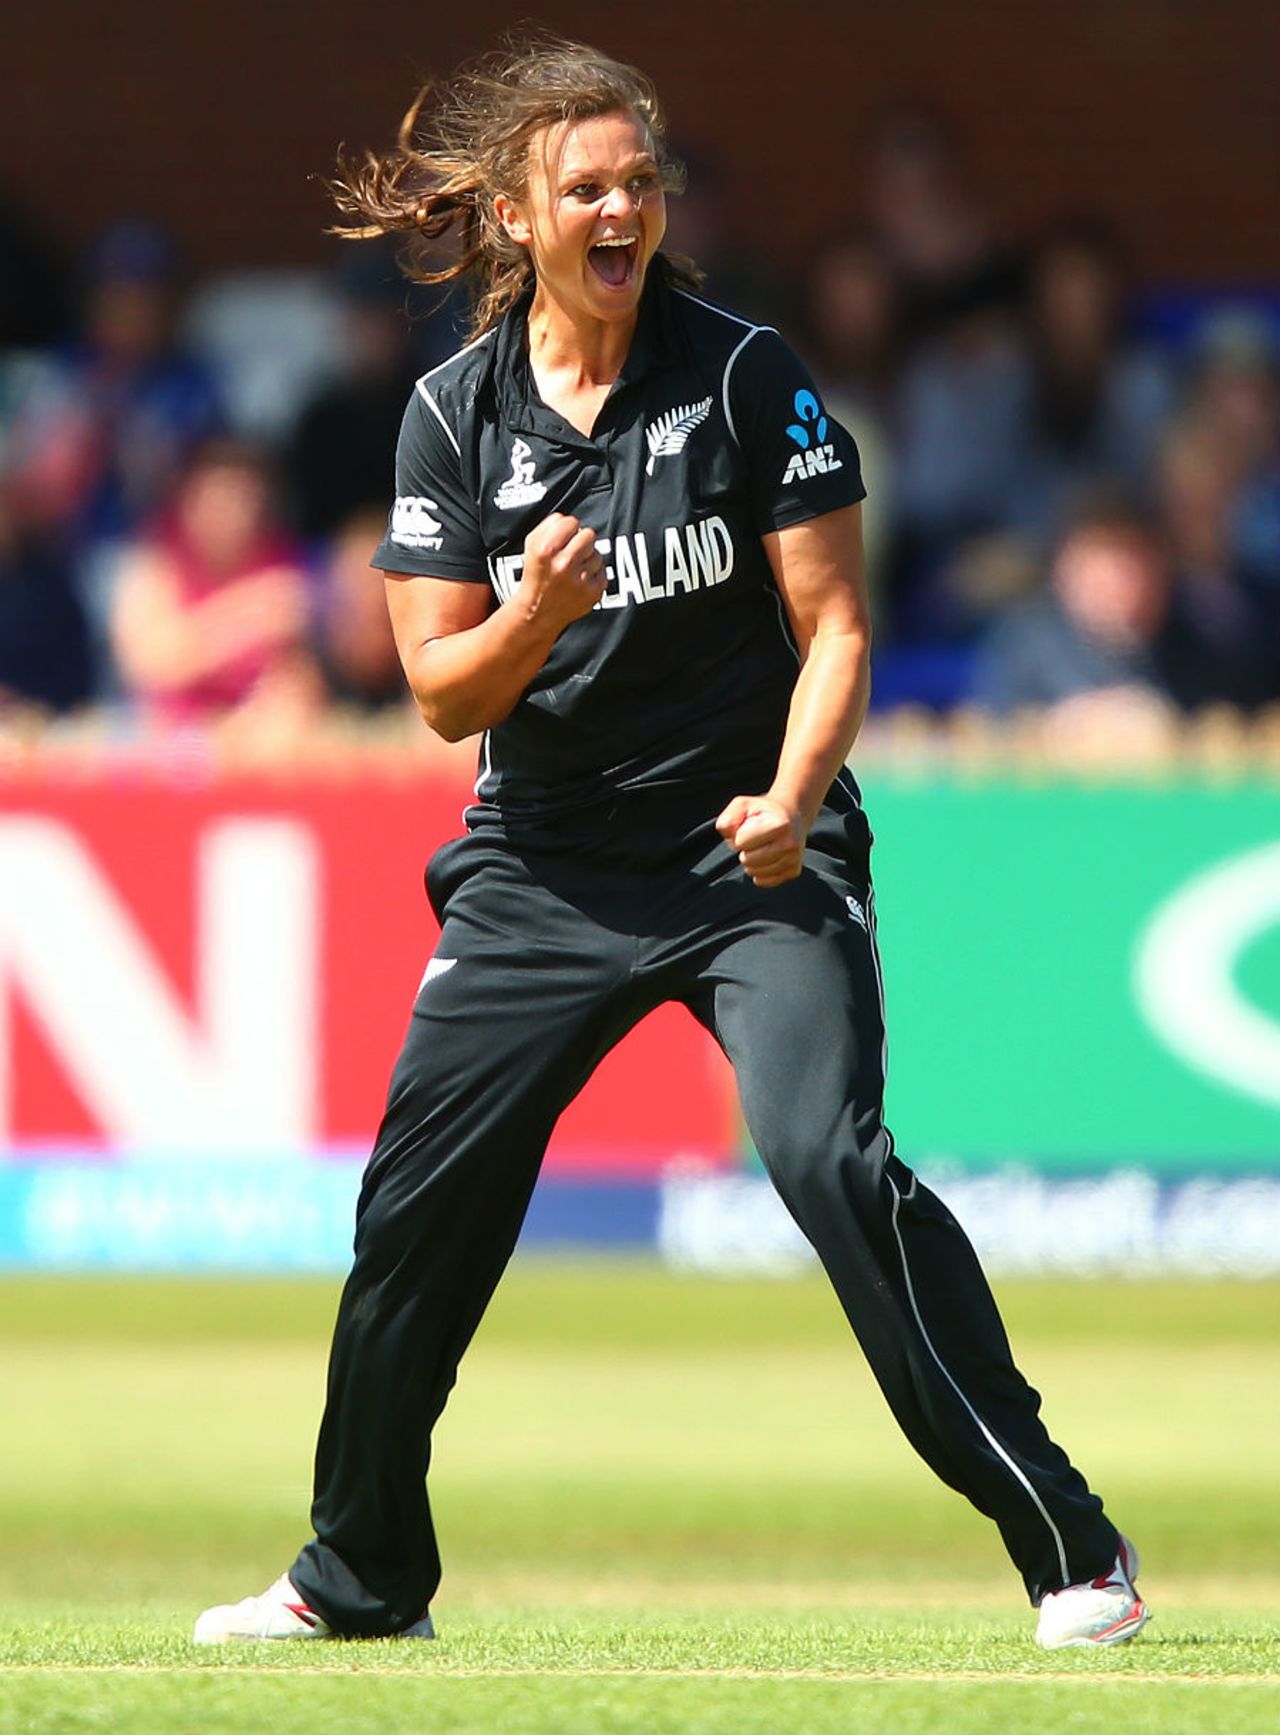 Suzie Bates claims the wicket of Heather Knight, England v New Zealand, Women's World Cup, Derby, July 12, 2017